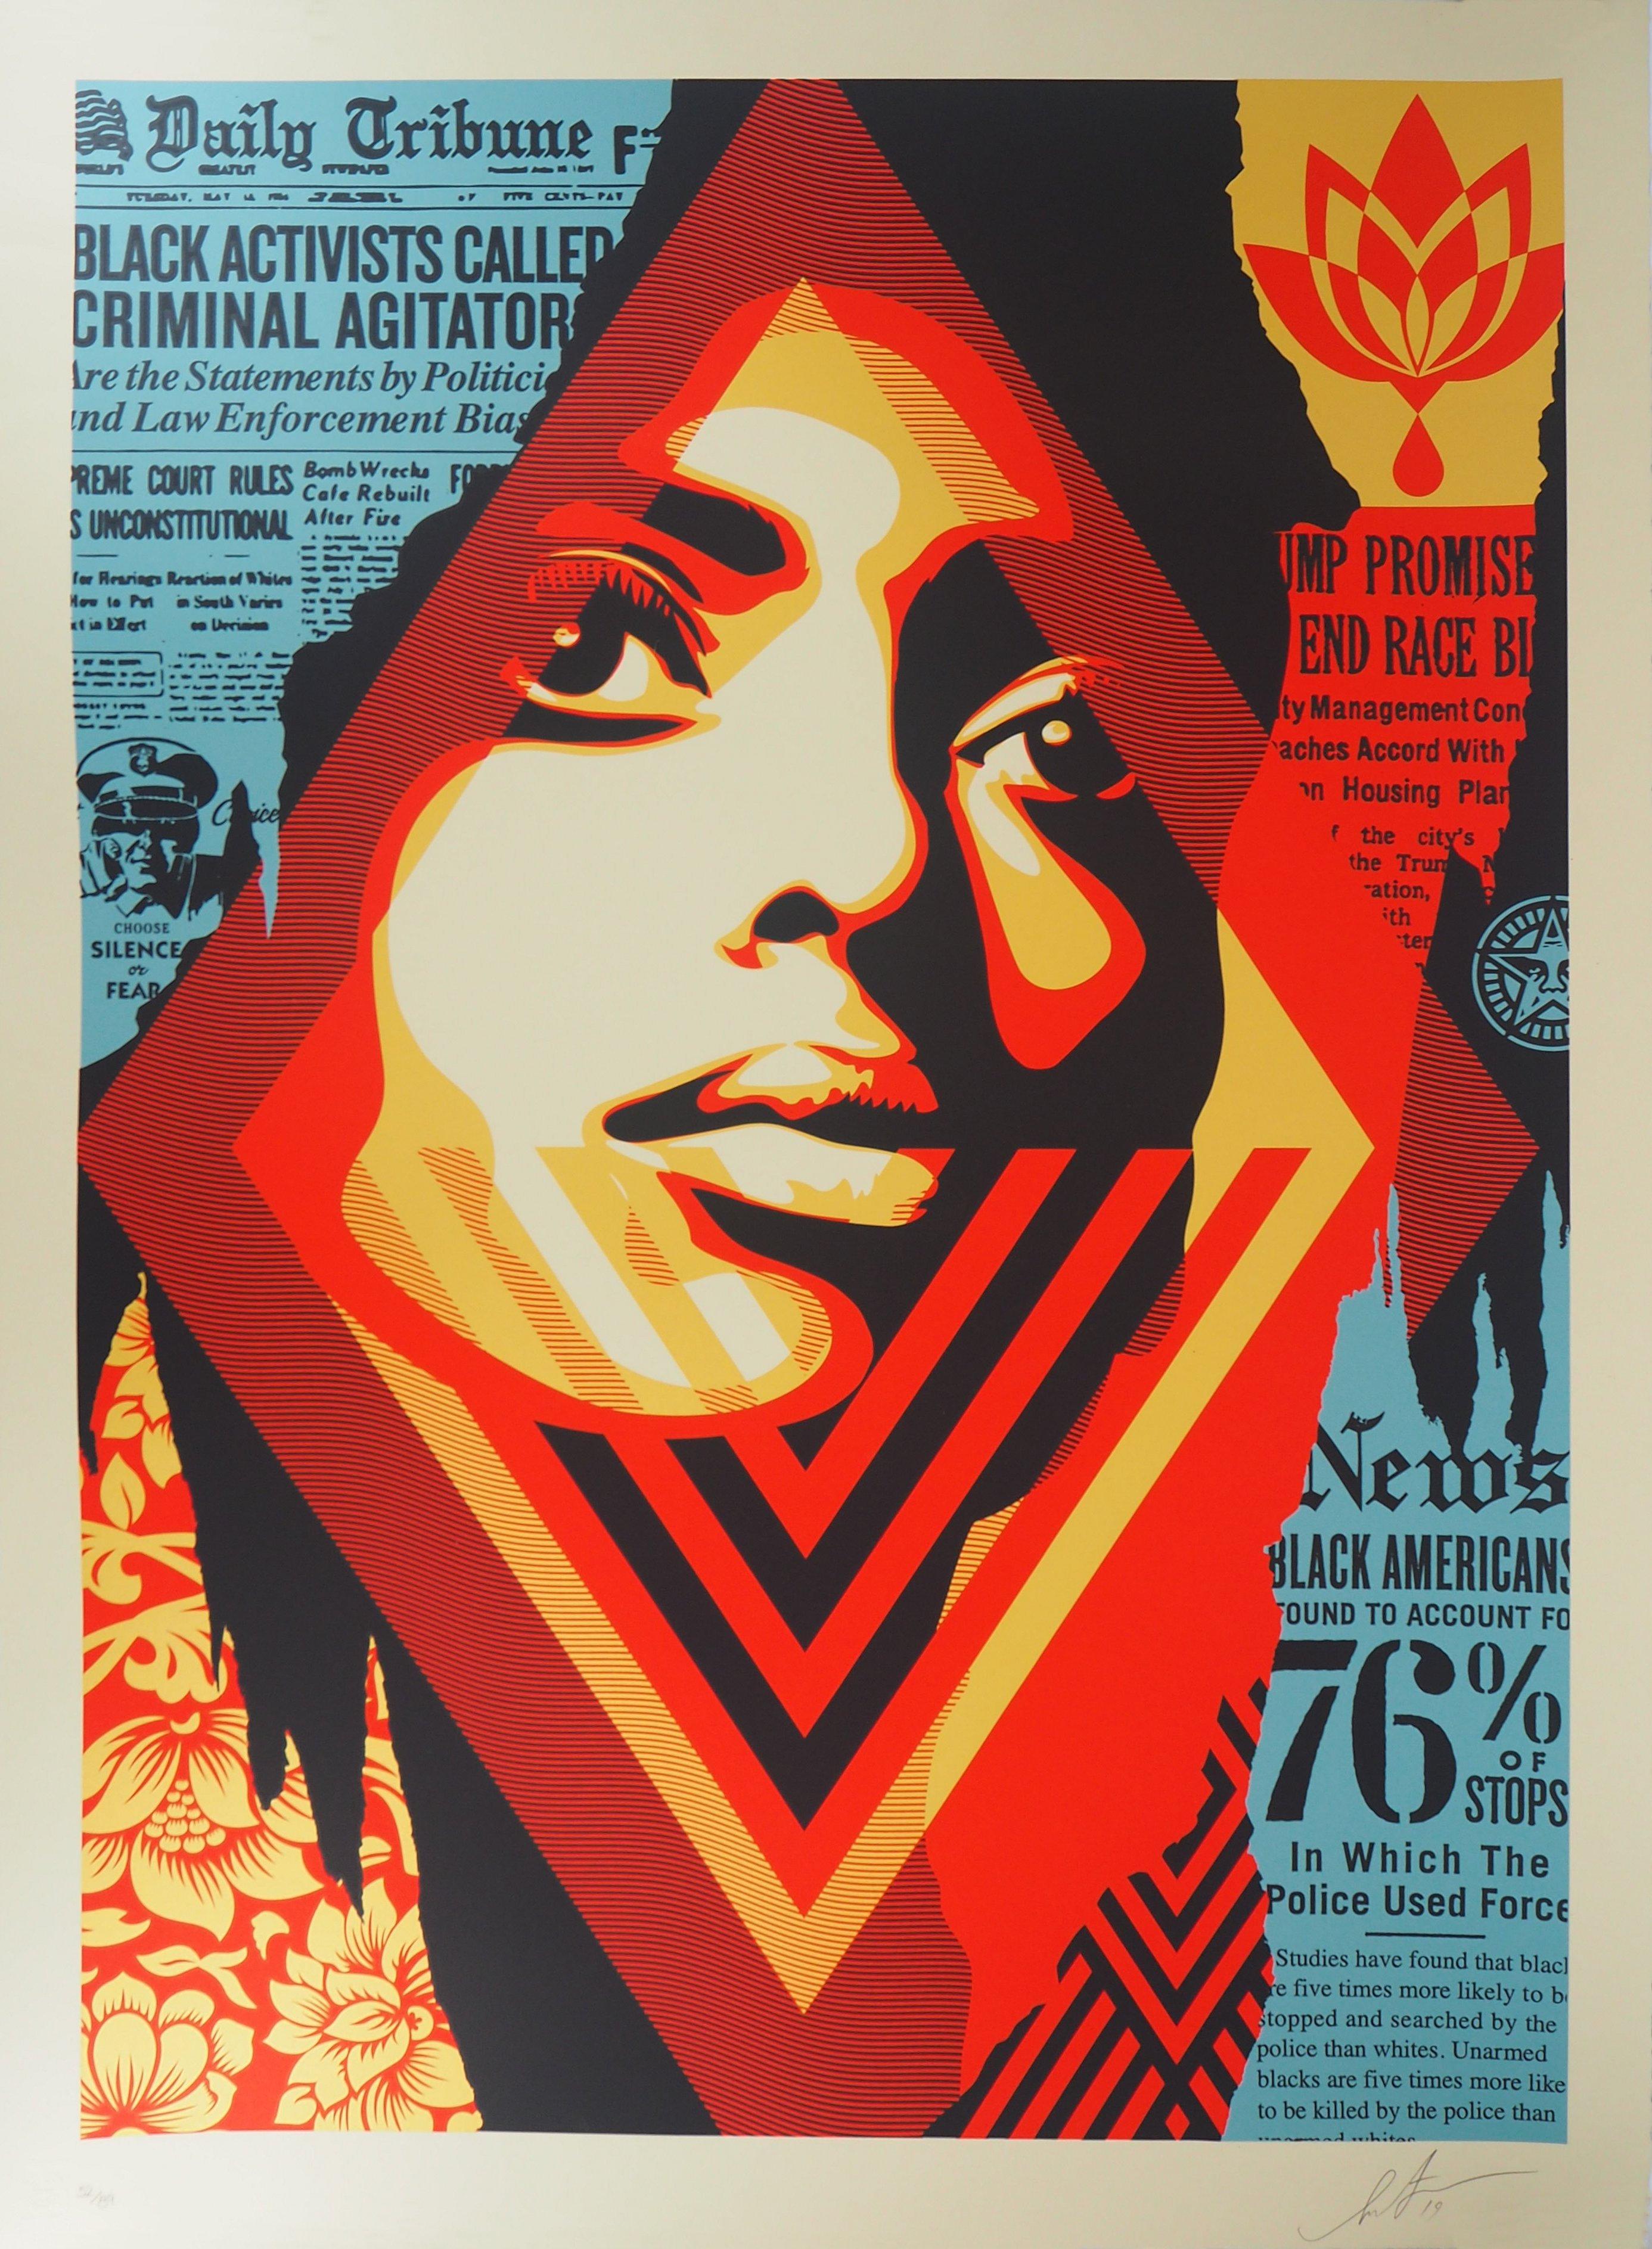 Shepard FAIREY (Obey Giant)
Black Lives Matter

Original sceen print
Handsigned in pencil
Authenticated with blind stamp on the artist
Numbered / 89
On vellum 41 x 30 inch (c. 104 x 76 cm)

Comes with Certificate of authenticity of the